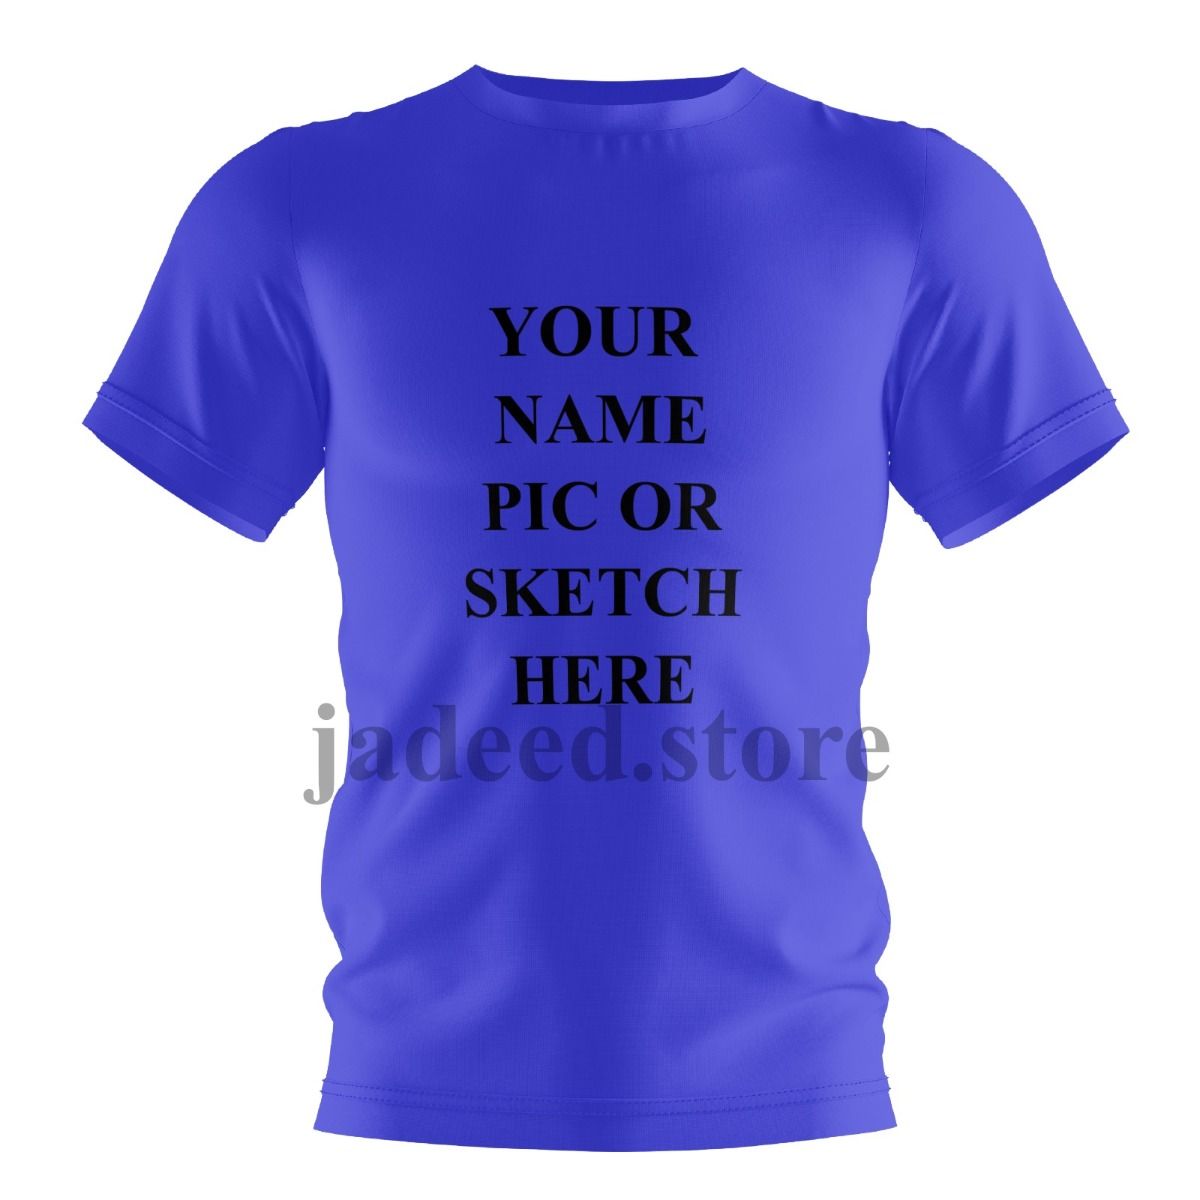 Customized Light Colour T- Shirt With Design/ Pic